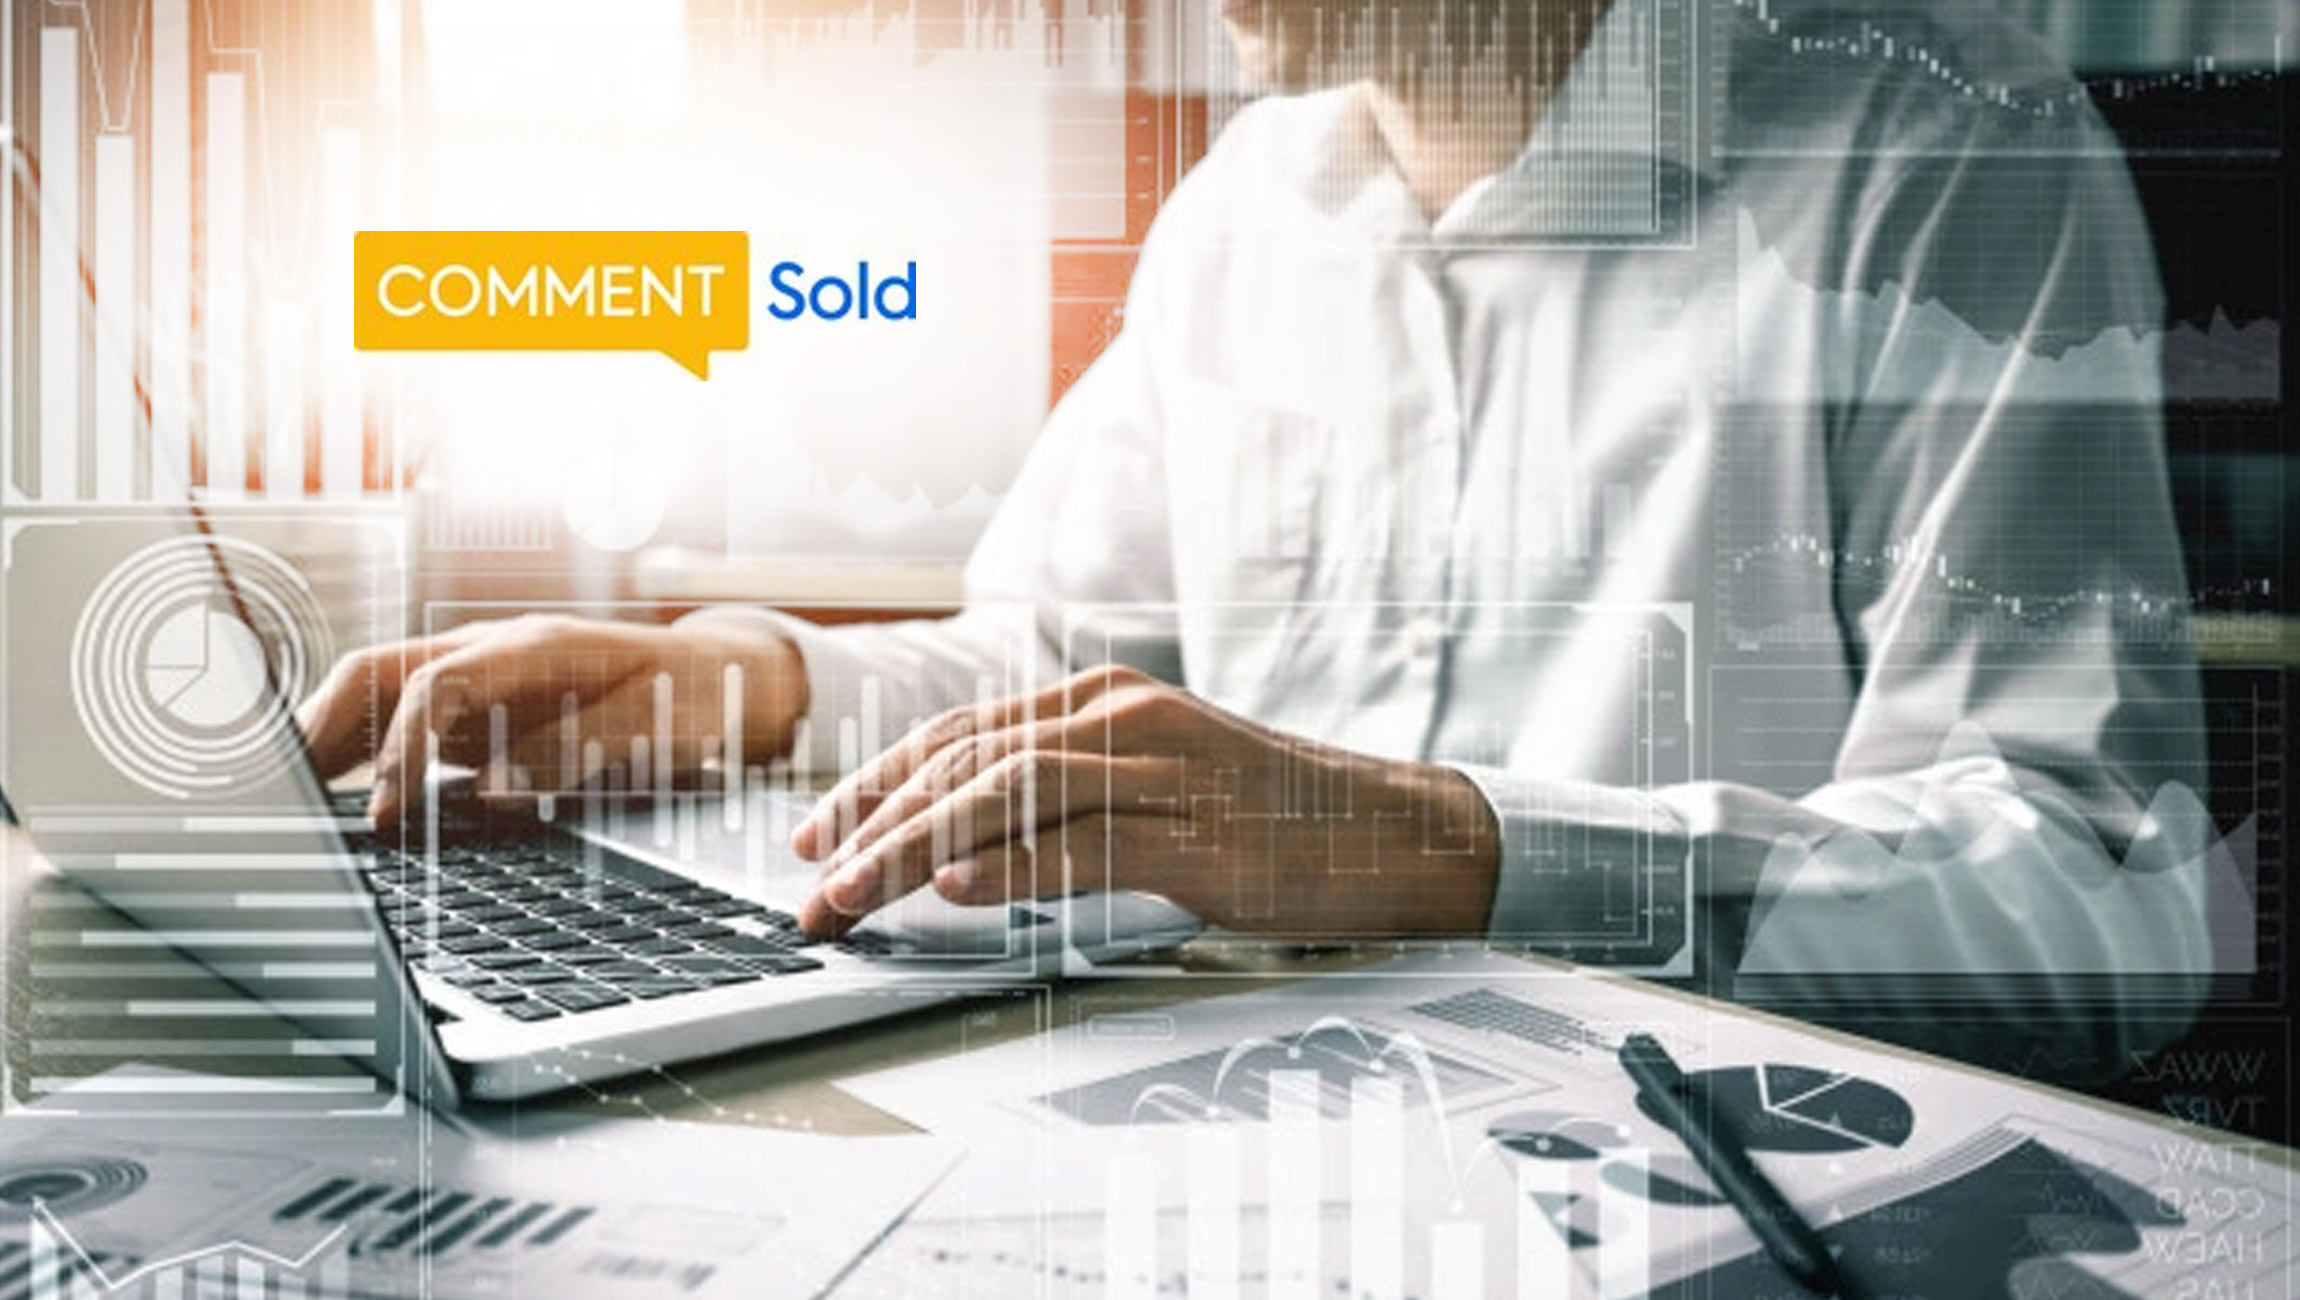 CommentSold Launches Point of Sale Solution Built on Stripe Terminal, Featuring Real-Time Inventory Management, Fraud Protection, and Extremely Low Fees